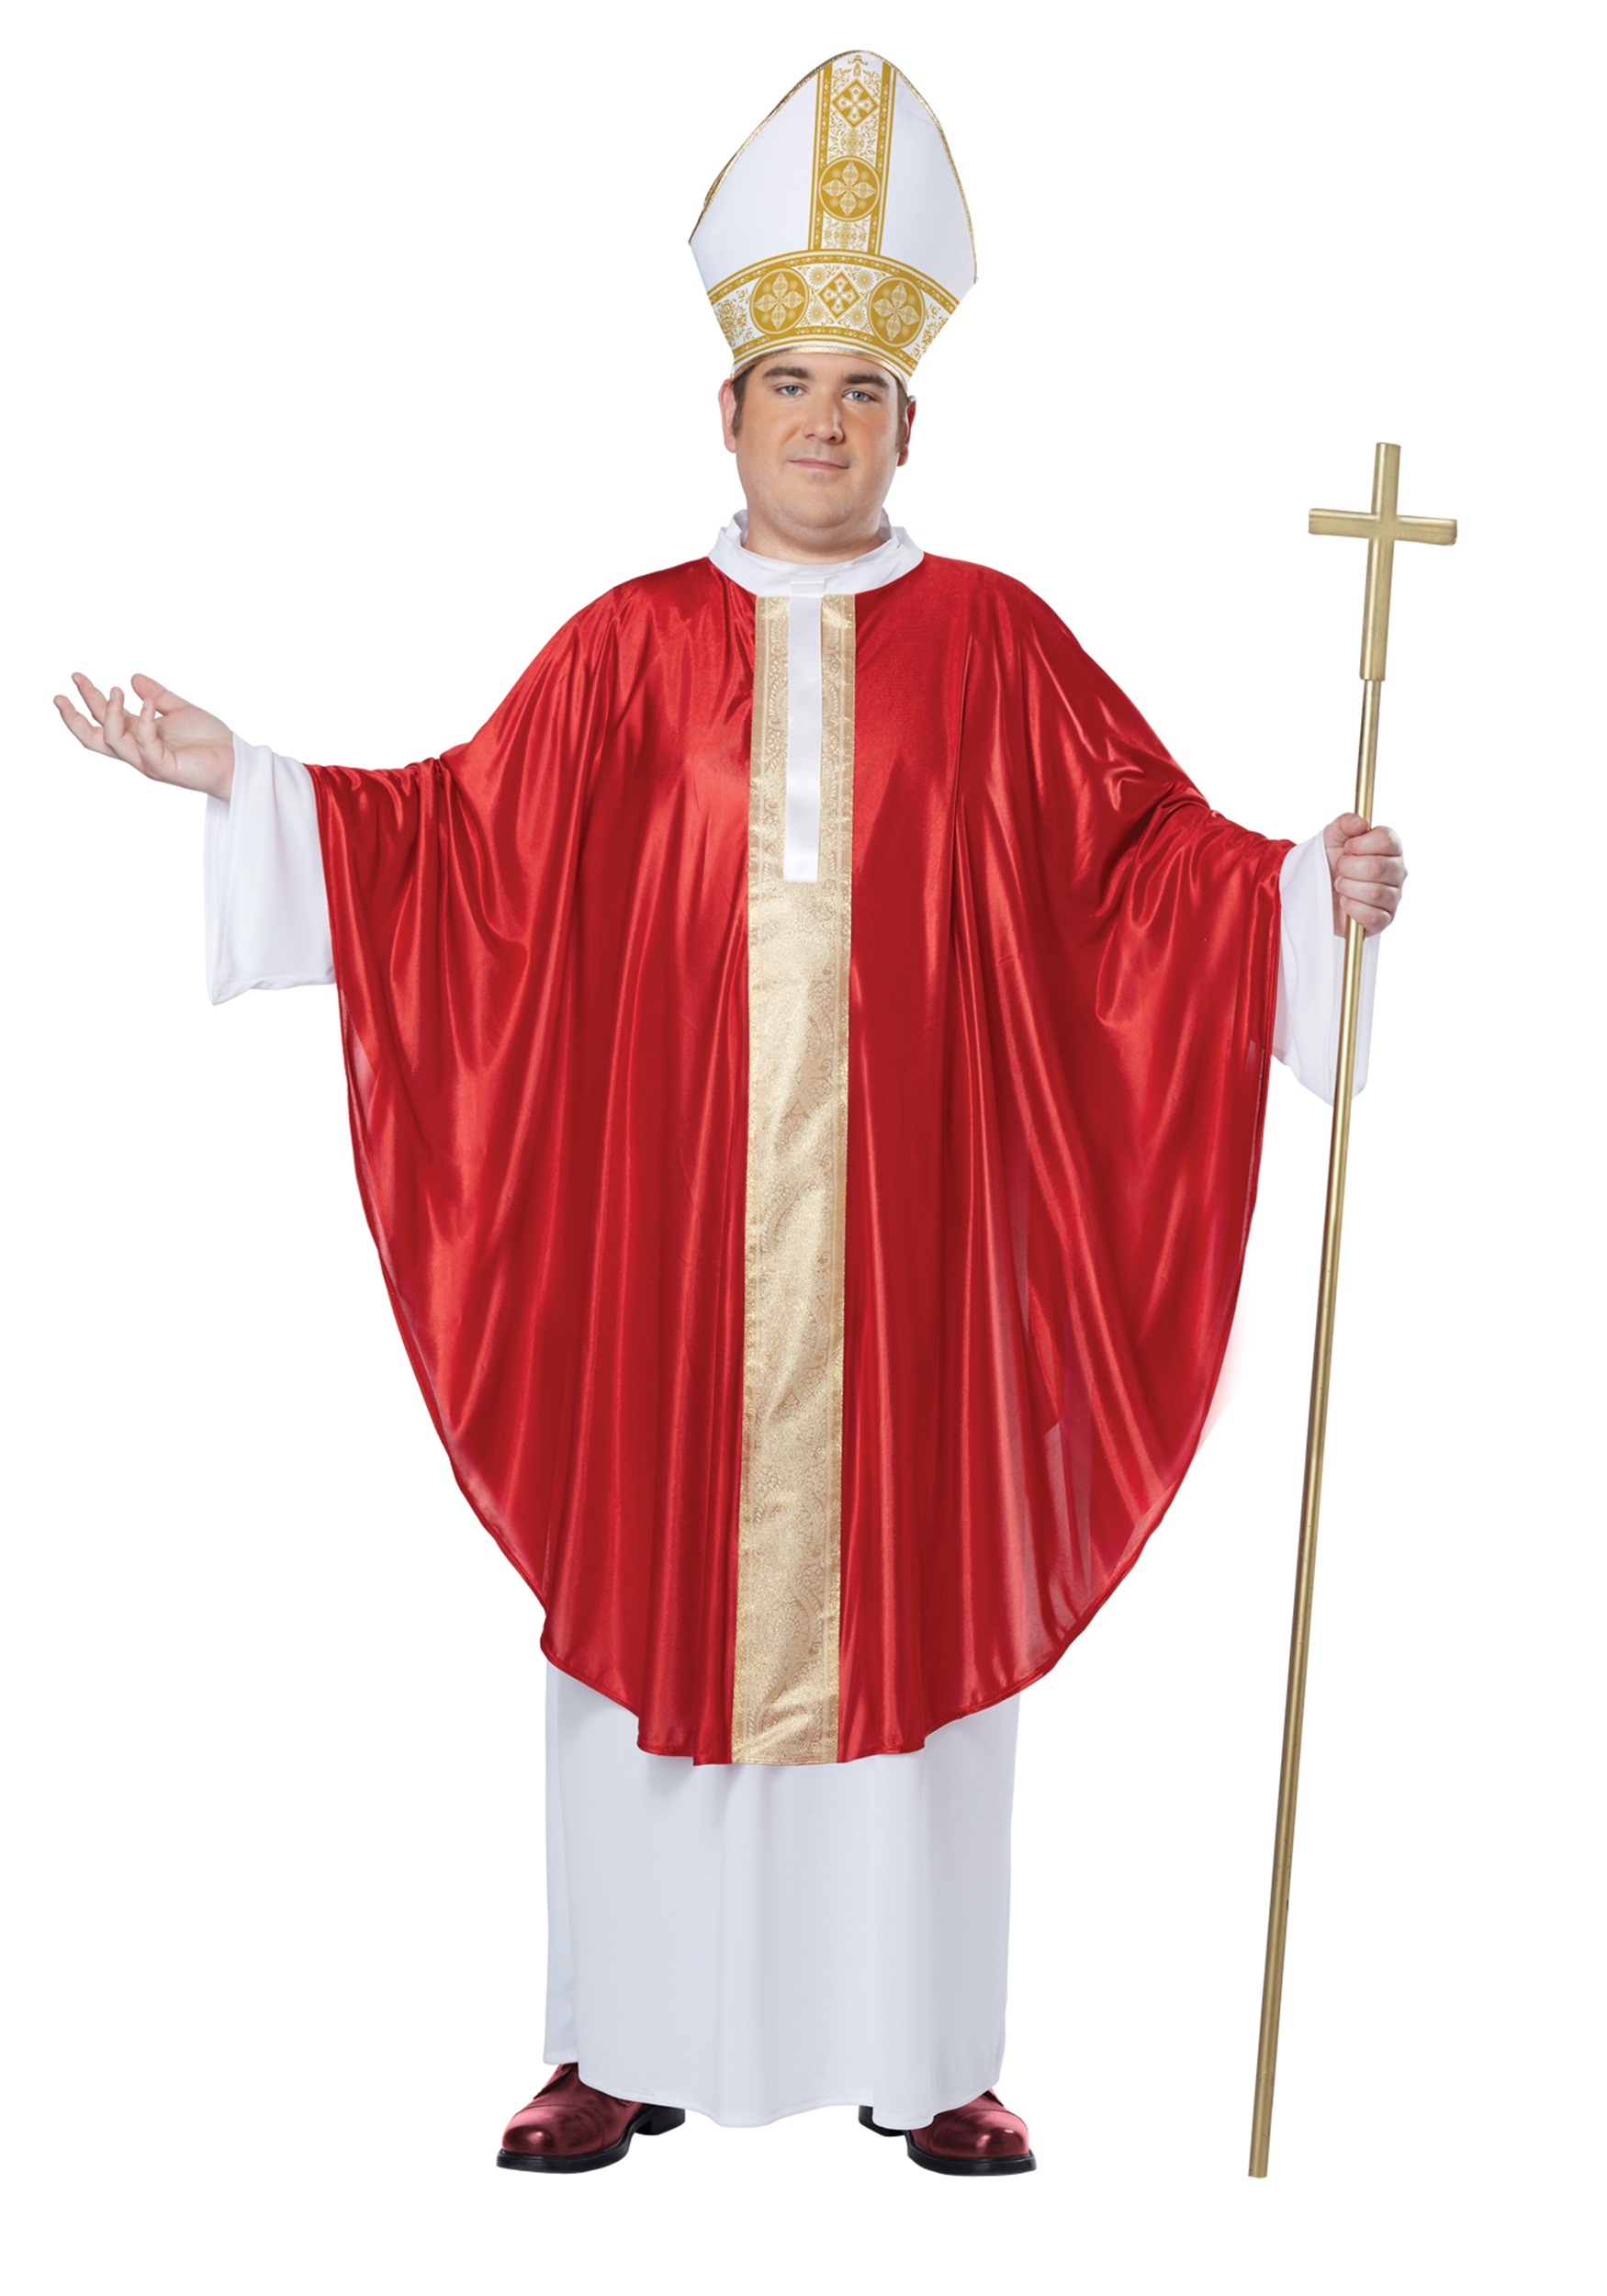 Photos - Fancy Dress California Costume Collection Plus Size Pope Costume For Men Red/White 